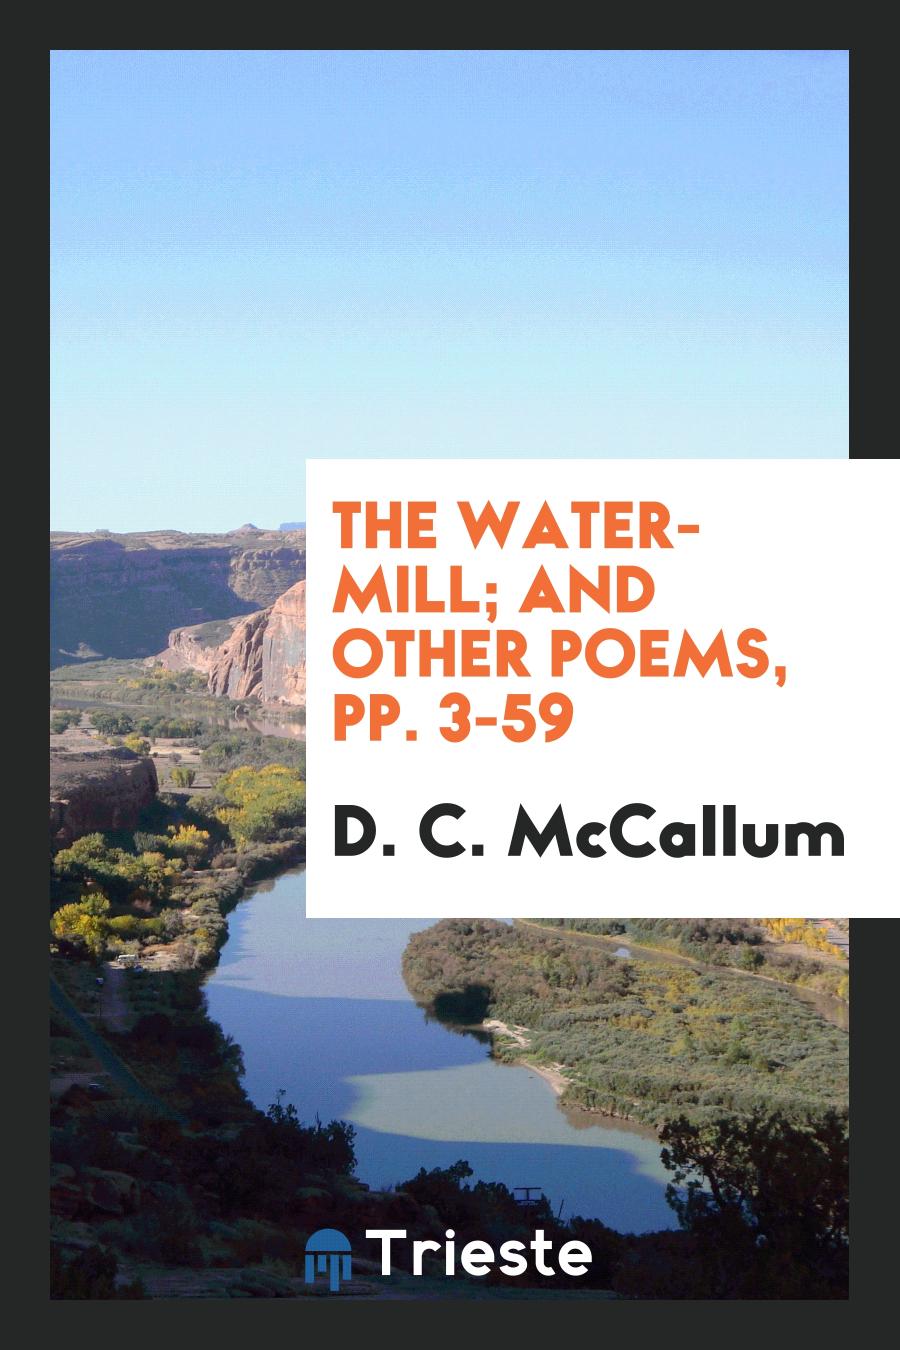 The Water-mill; And Other Poems, pp. 3-59